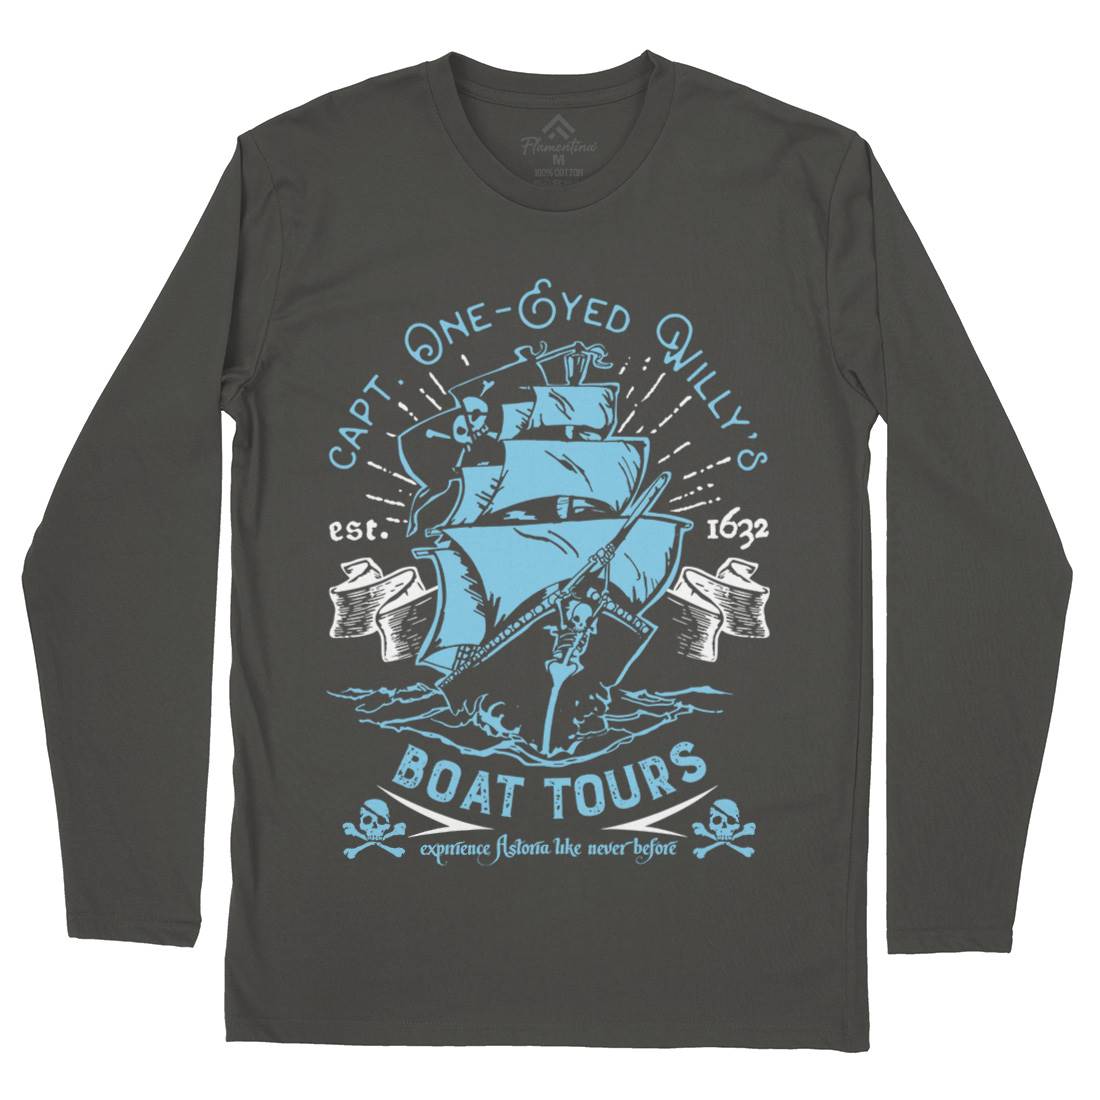 One-Eyed Willys Boat Tours Mens Long Sleeve T-Shirt Horror D160